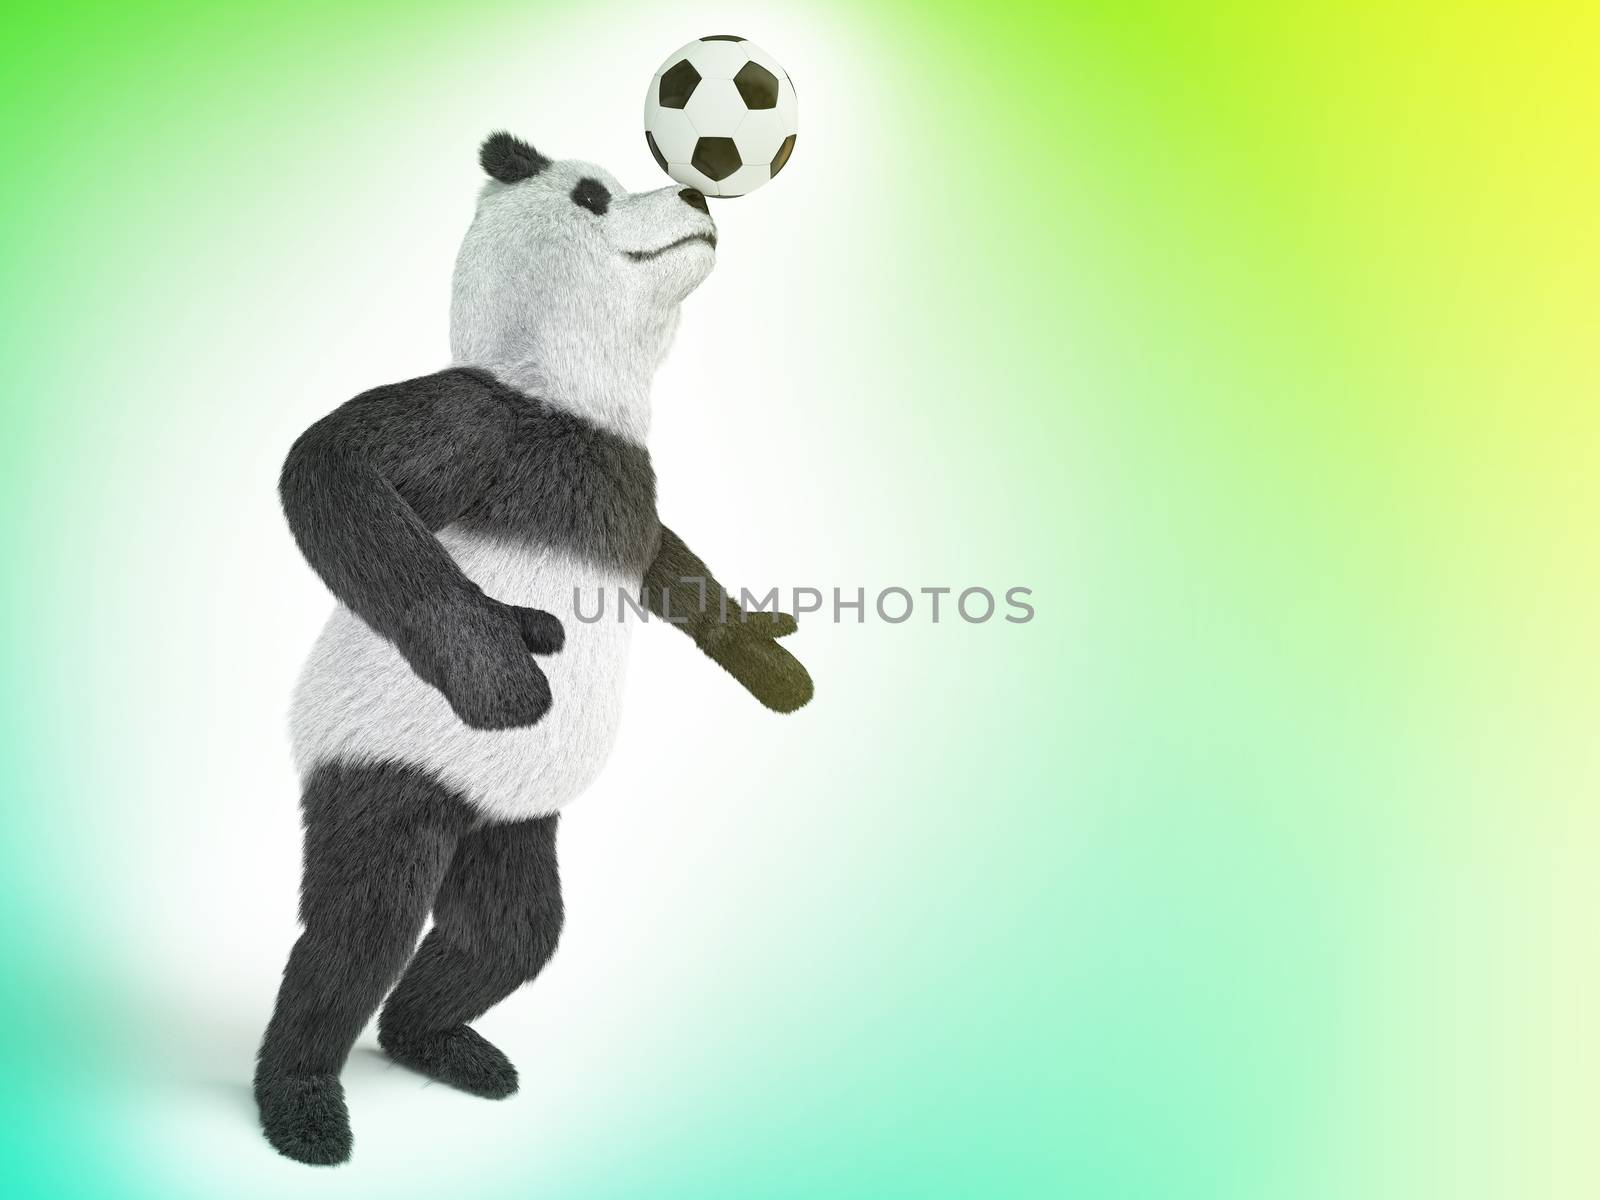 character circus bamboo bear giant panda standing spreading legs to the sides chasing a ball on his nose. involuntary amazing animals by xtate